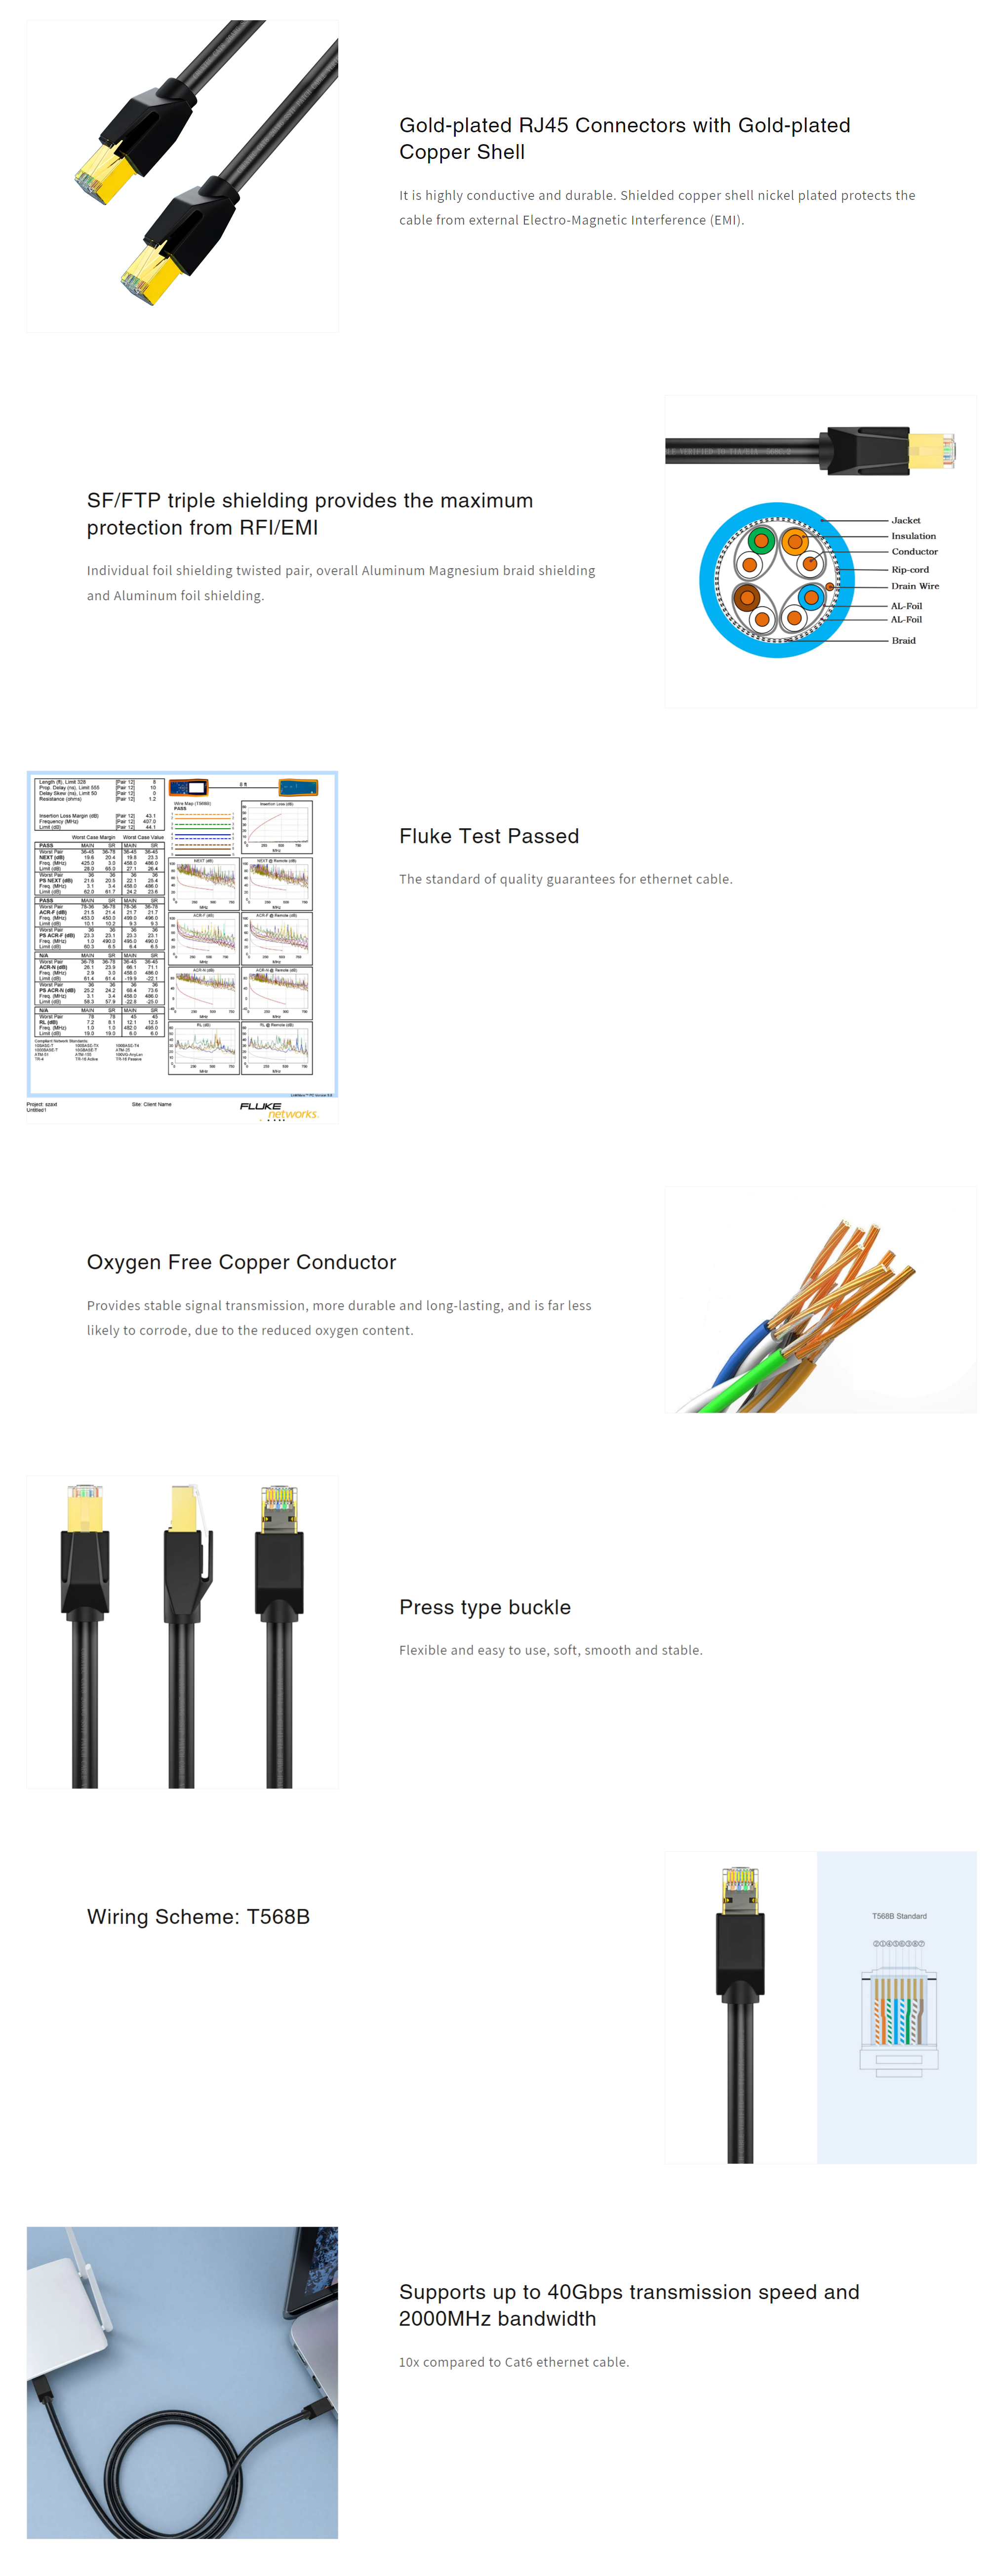 A large marketing image providing additional information about the product Cruxtec CAT8 2m 40GbE SF/FTP Triple Shielding Ethernet Cable Black - Additional alt info not provided